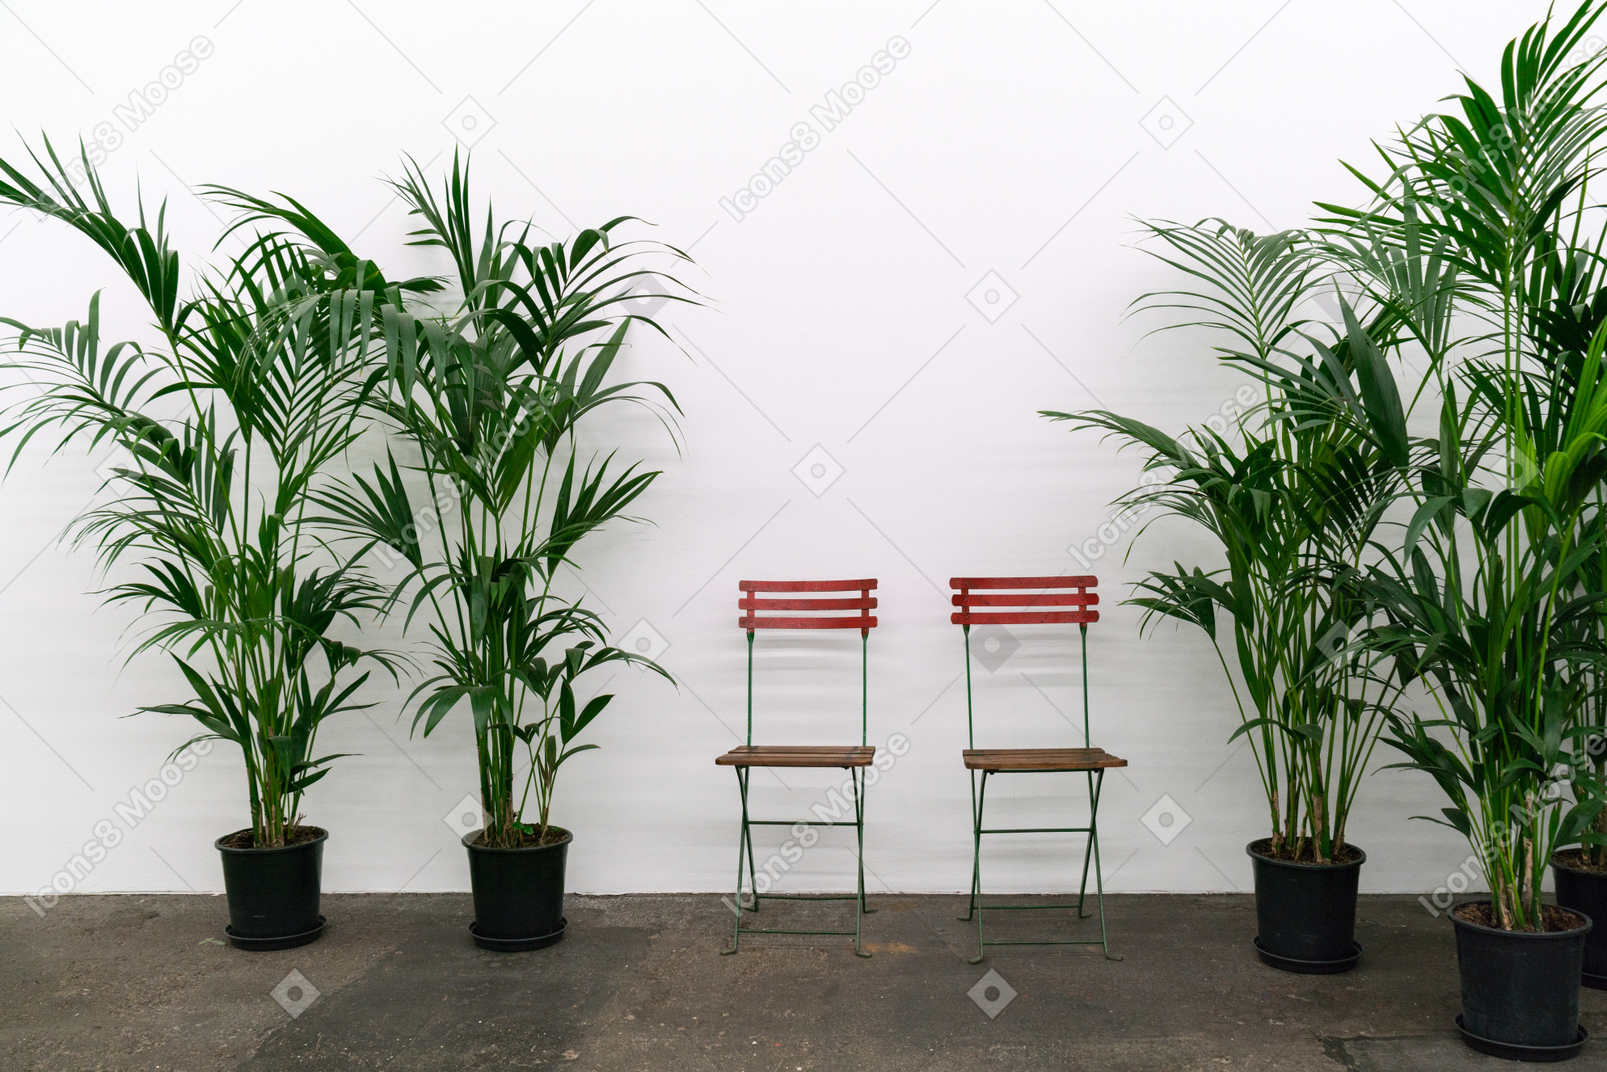 Green plants in pots and two red chairs in light room